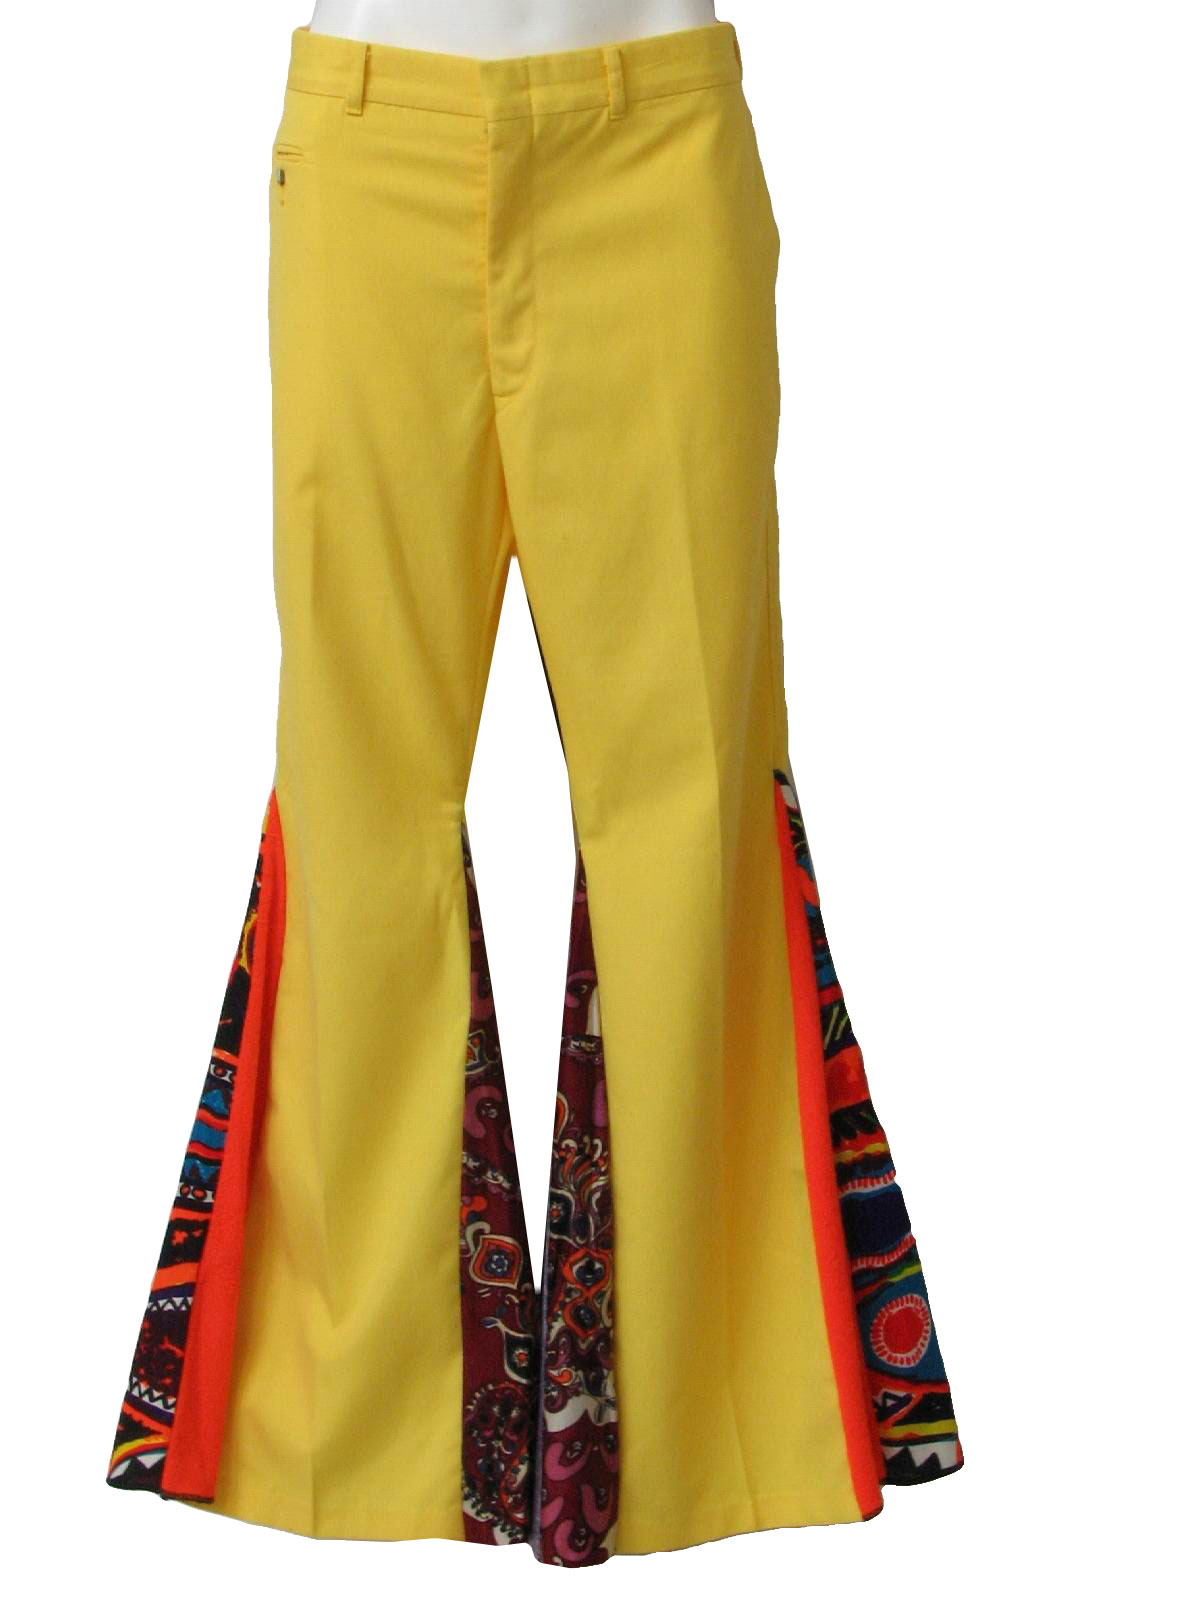 mens bell bottoms for sale